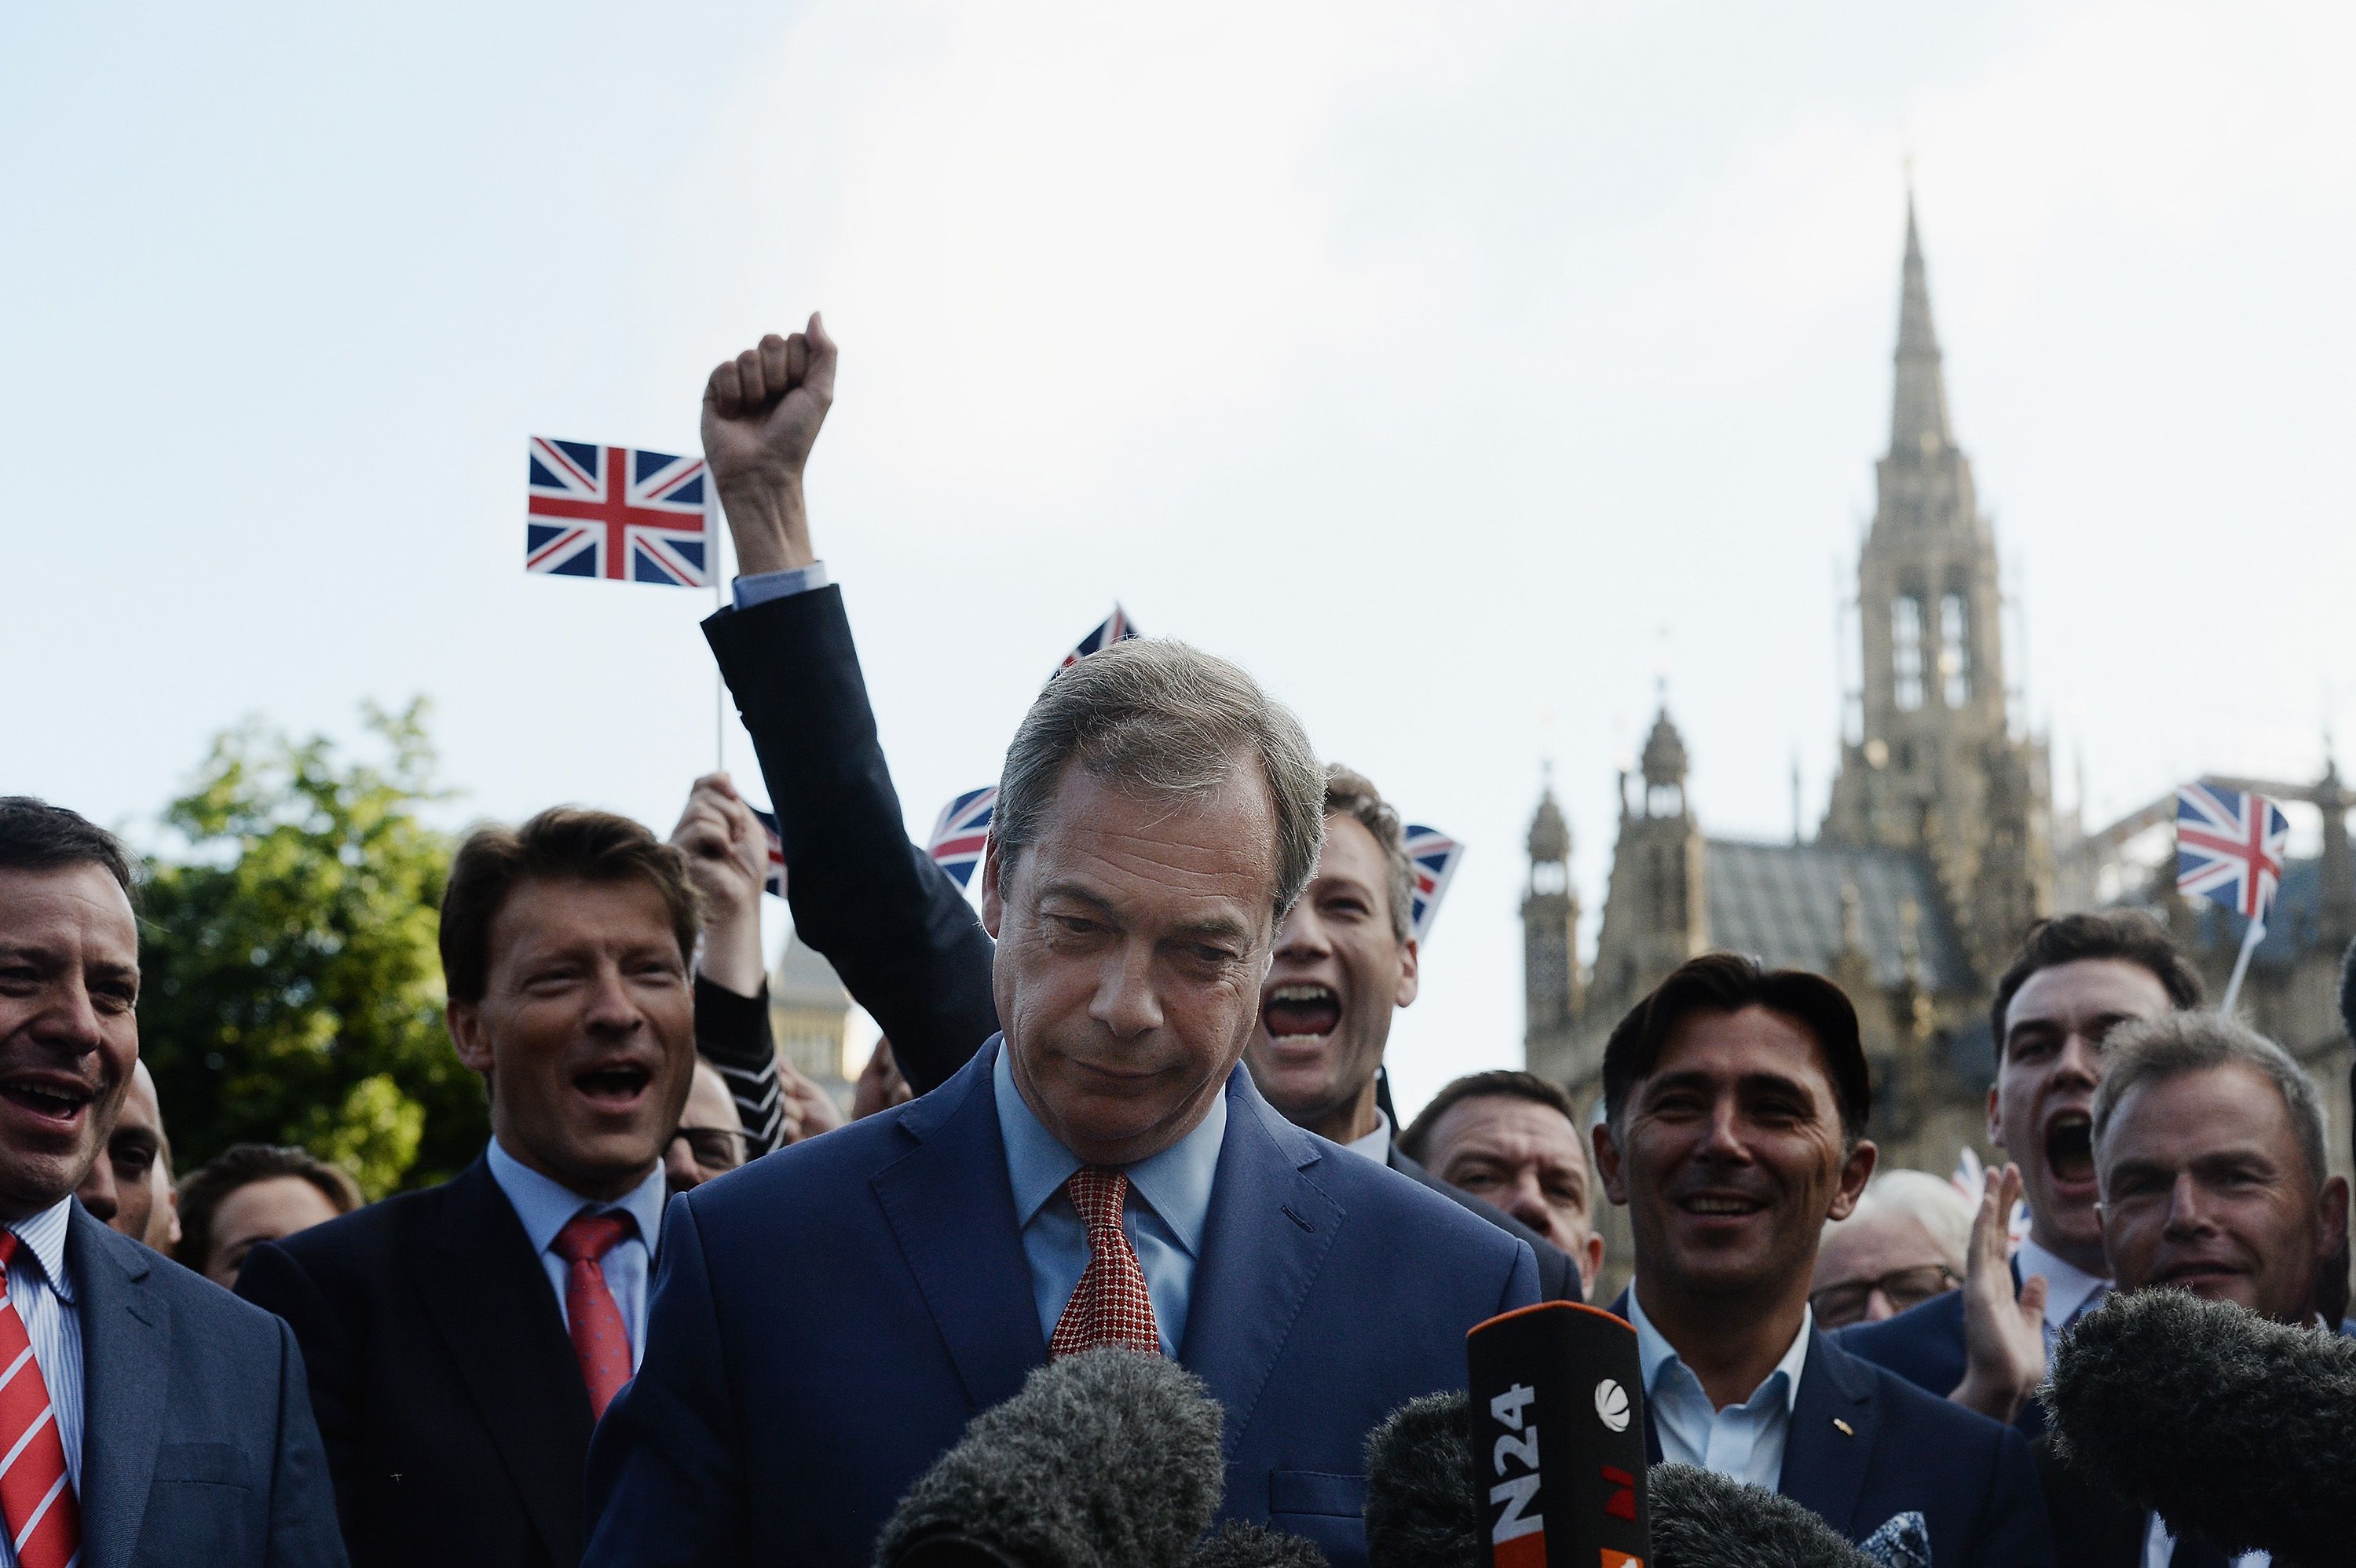 LONDON, ENGLAND - JUNE 24: Leader of UKIP and Vote Leave campaign Nigel Farage arrives to speak to the assembled media at College Green, Westminster following the results of the EU referendum on June 24, 2016 in London, United Kingdom. The result from the historic EU referendum has now been declared and the United Kingdom has voted to LEAVE the European Union. (Photo by Mary Turner/Getty Images)